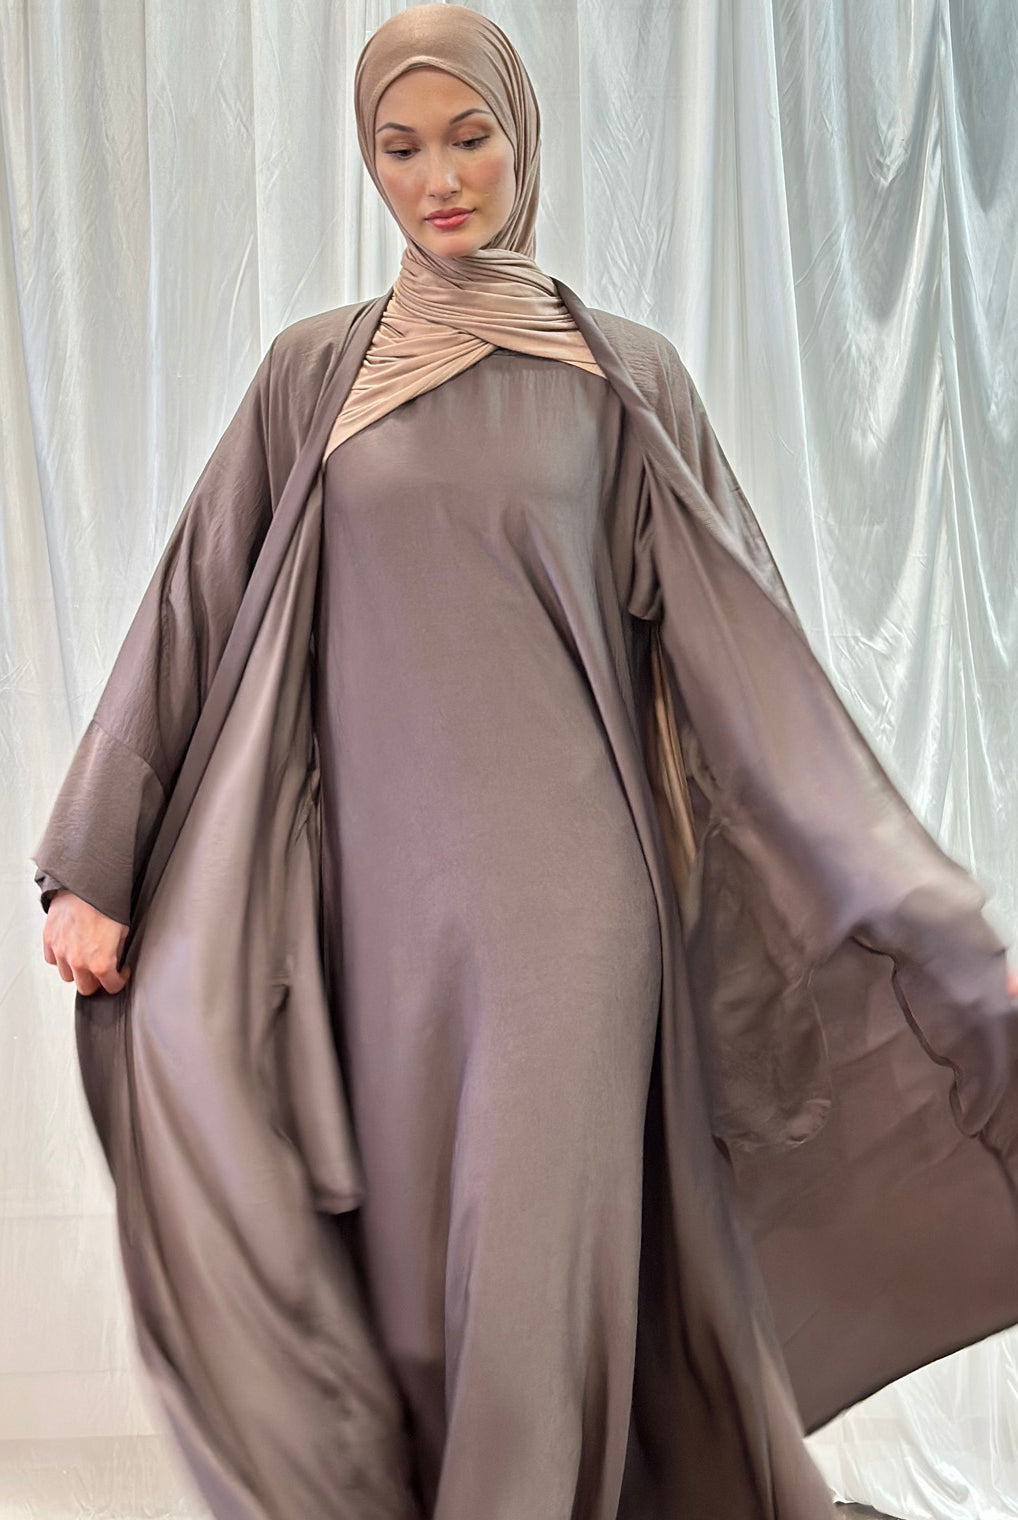 Image depicting a woman wearing a luxurious Hareer Abaya in a neutral brown tone, perfectly complemented by the matching Hareer Jacket. The smooth texture of the silk fabric enhances the graceful drape of the garment, ideal for Spring/Summer fashion.